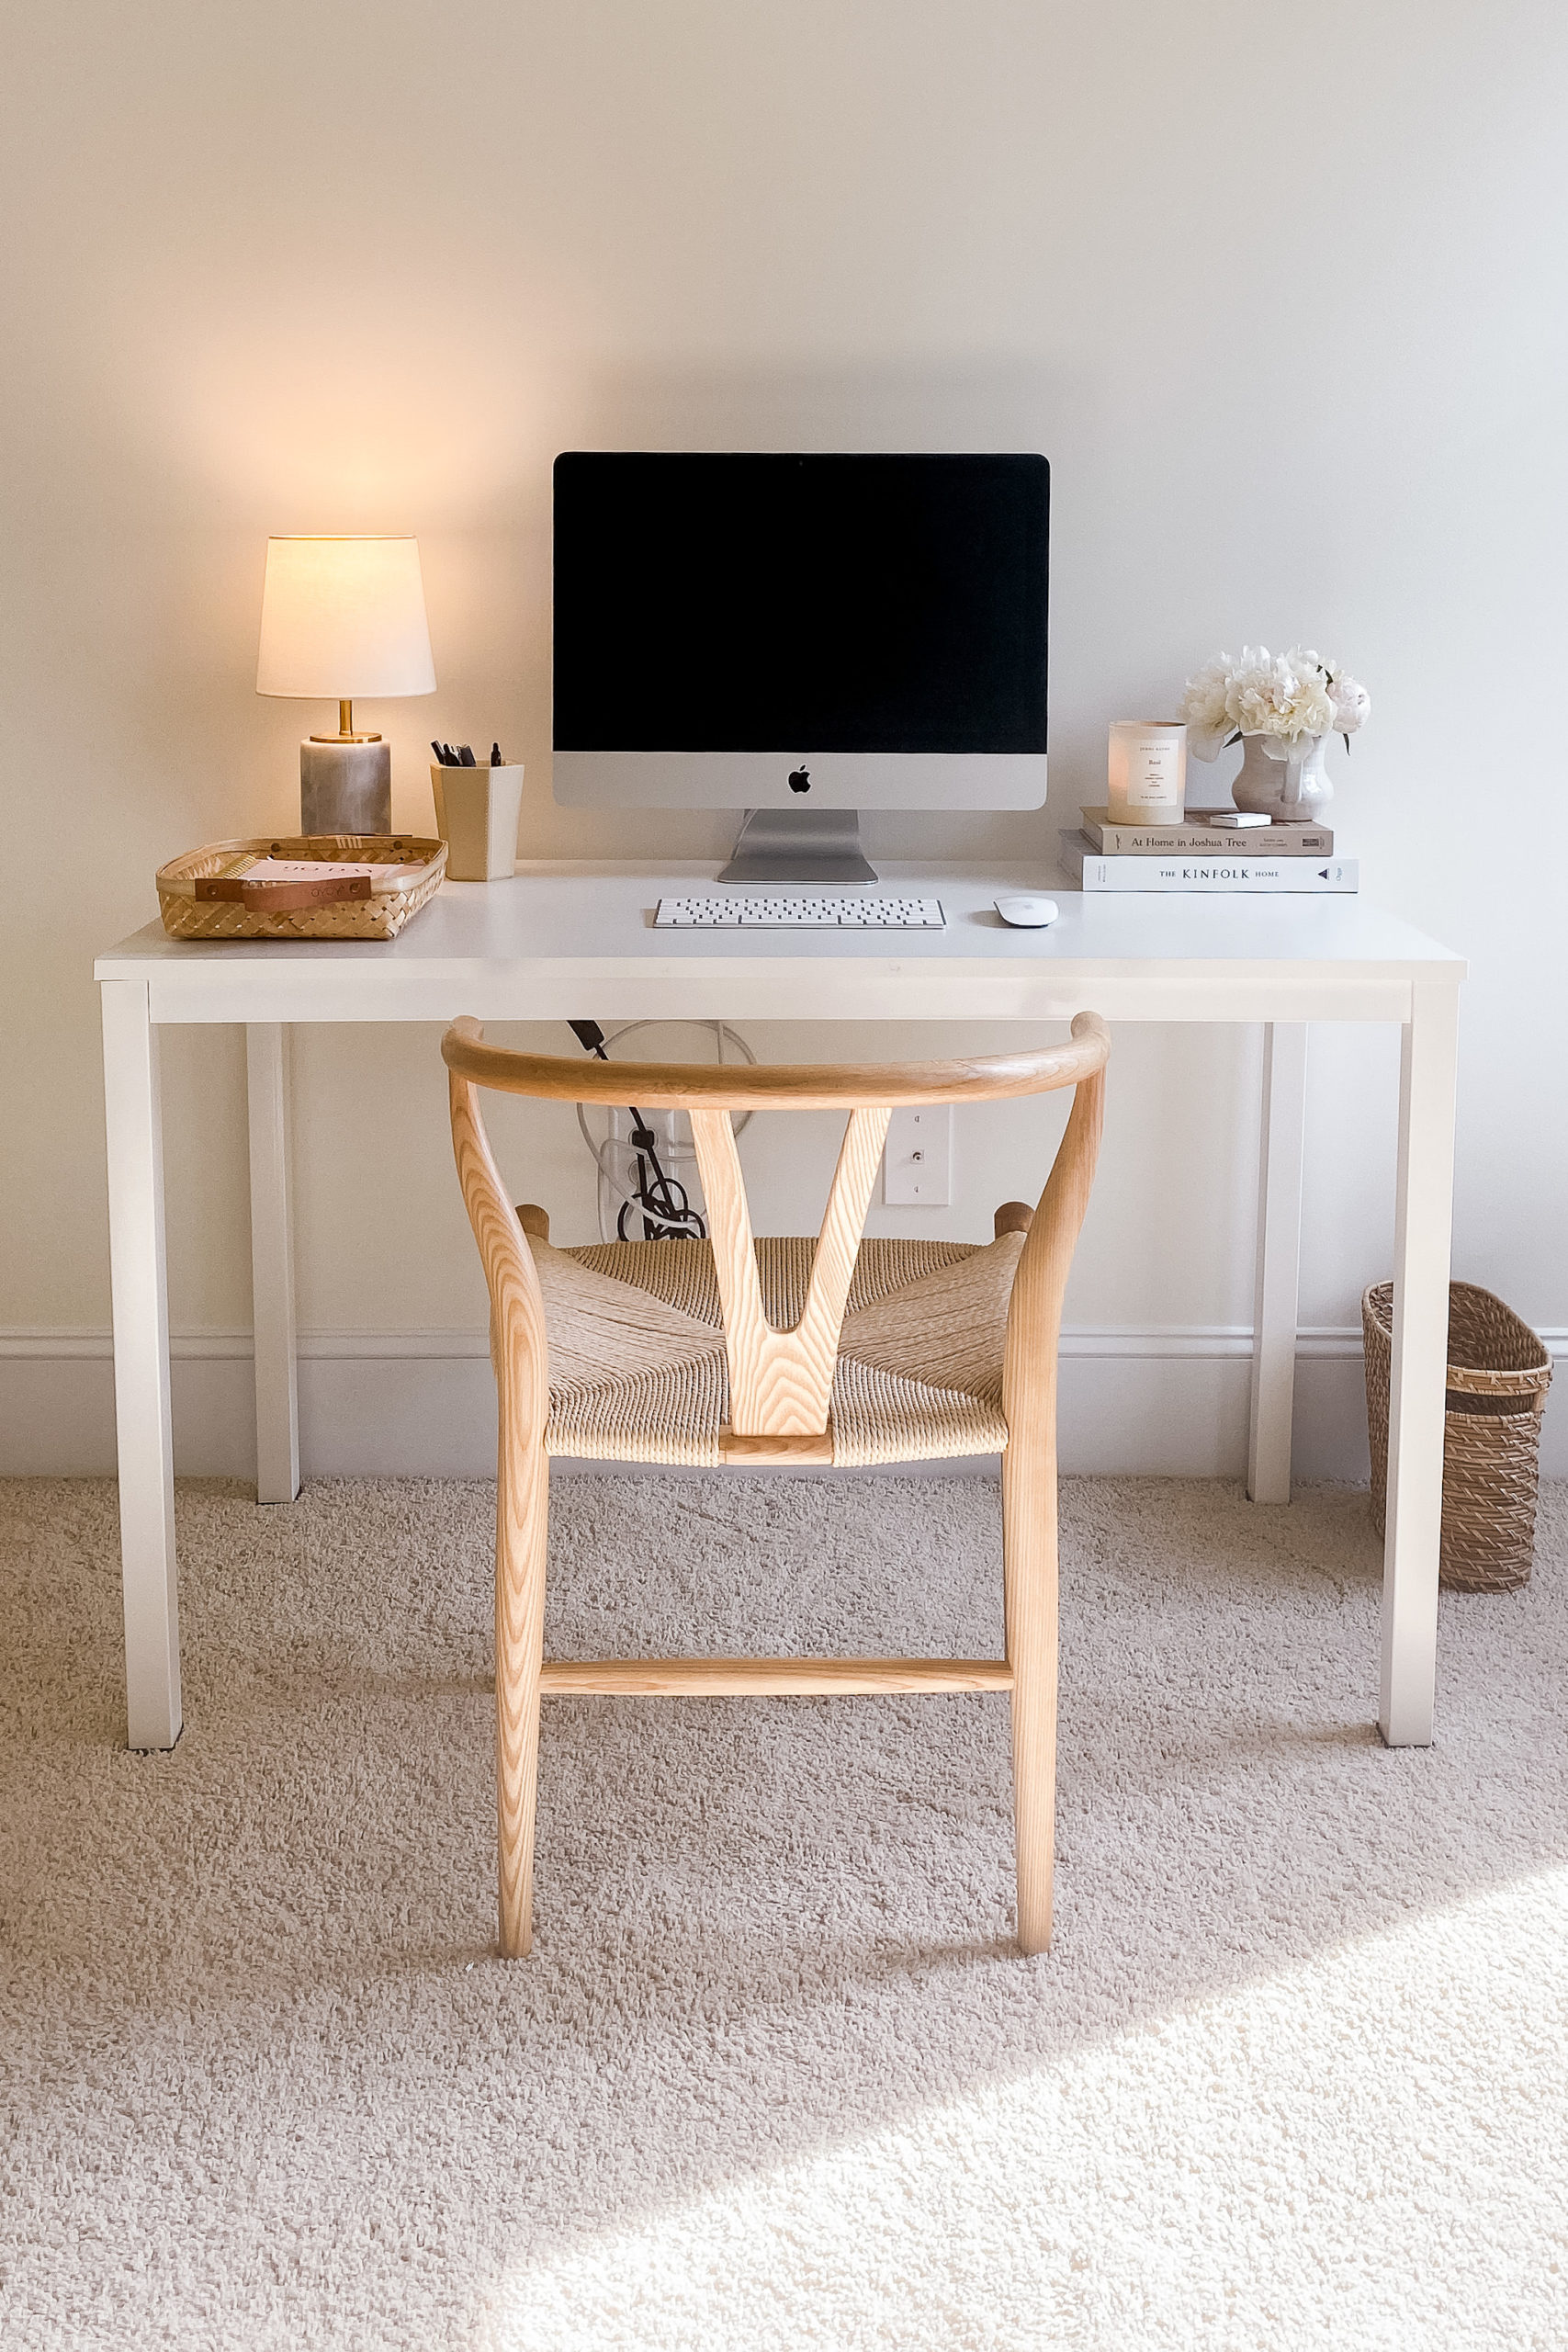 13 Work from Home Essentials for Every Home Office